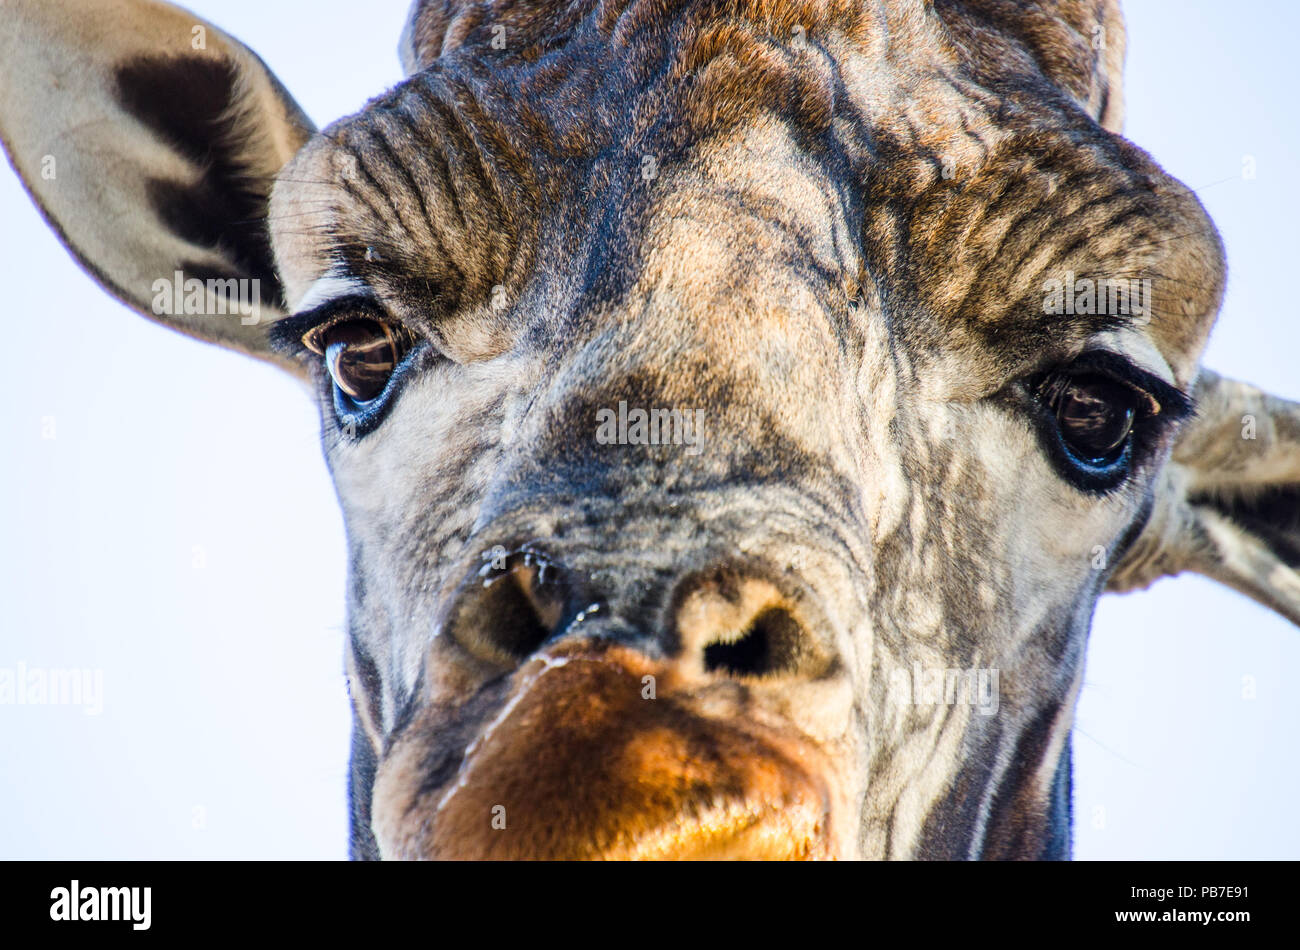 Close up detail of adult giraffe staring at camera, isolated with white background. Stock Photo